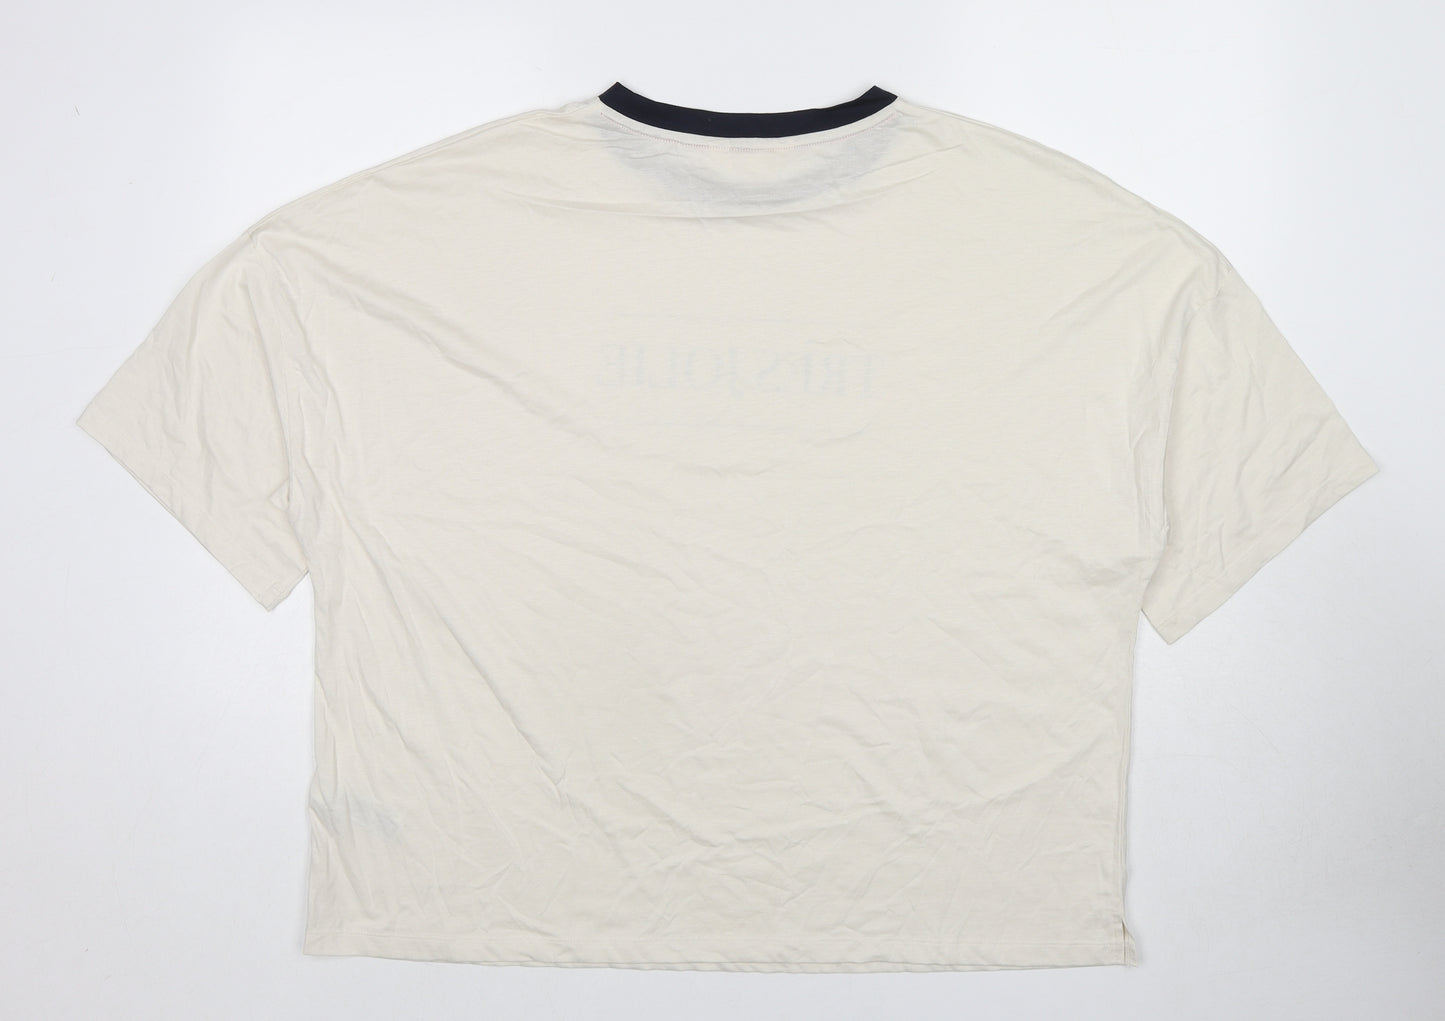 Marks and Spencer Womens Ivory Cotton Basic T-Shirt Size XL Round Neck - Tres Jolie